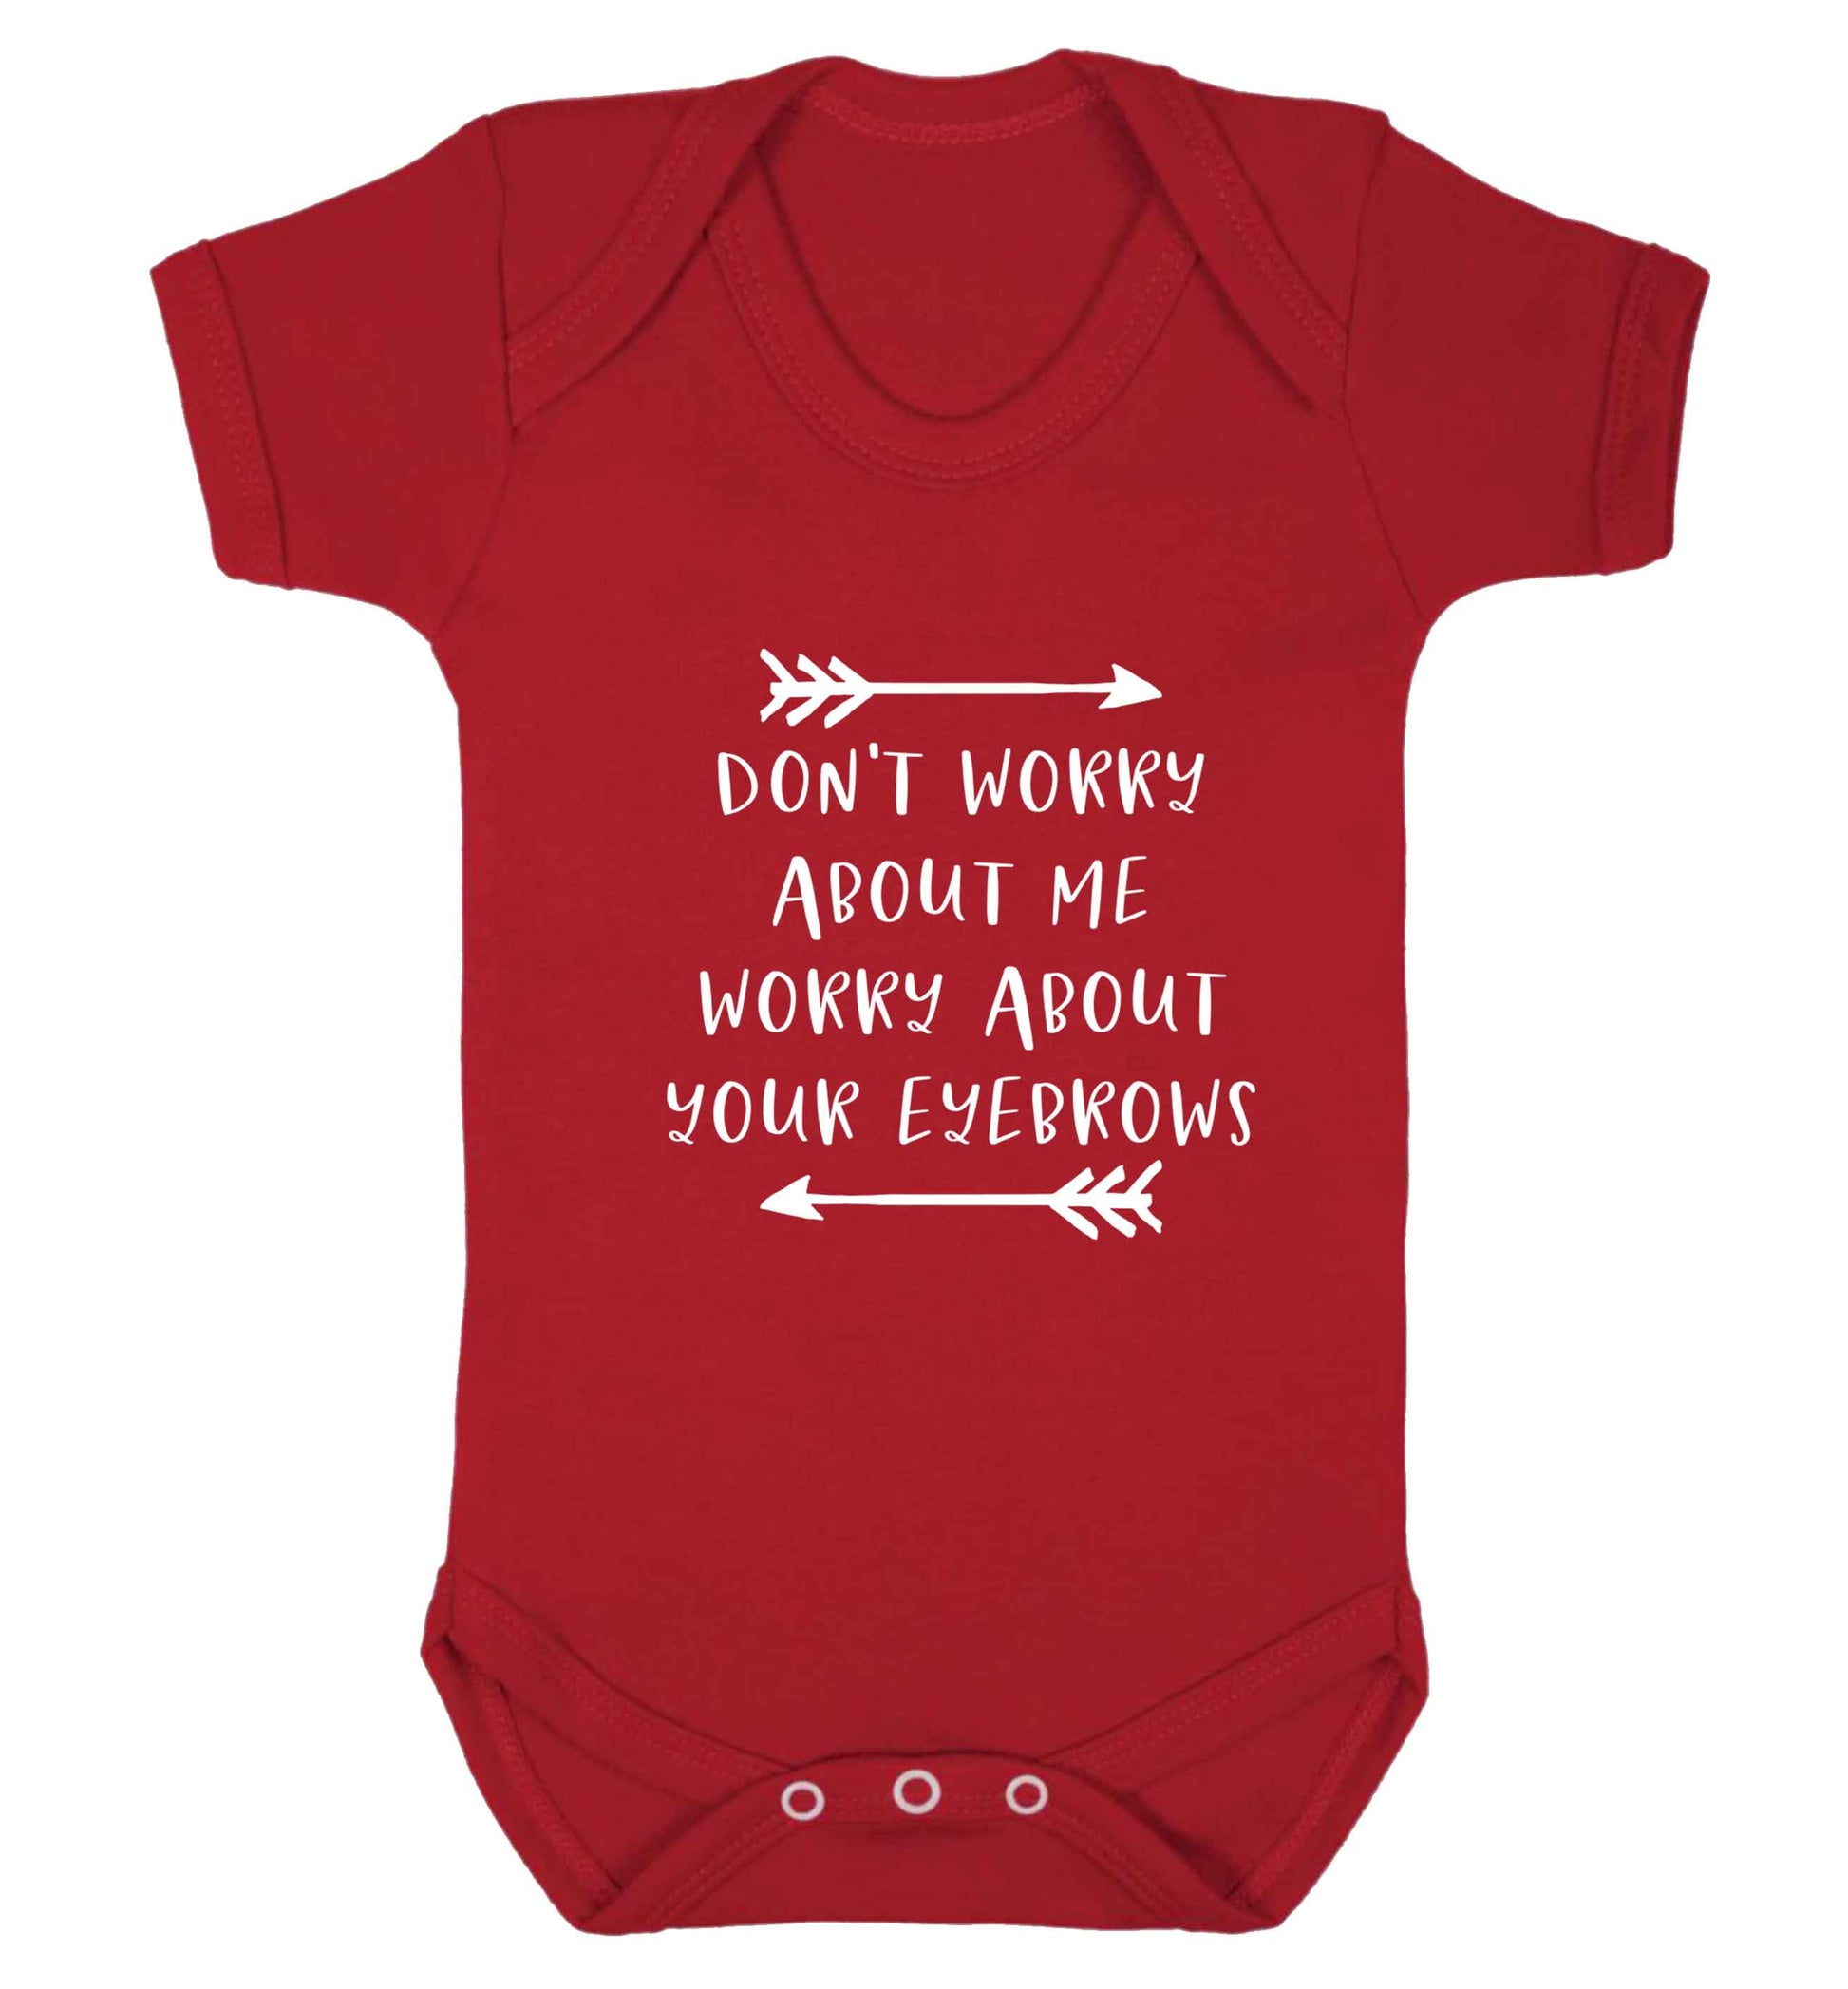 Don't worry about me worry about your eyebrows baby vest red 18-24 months